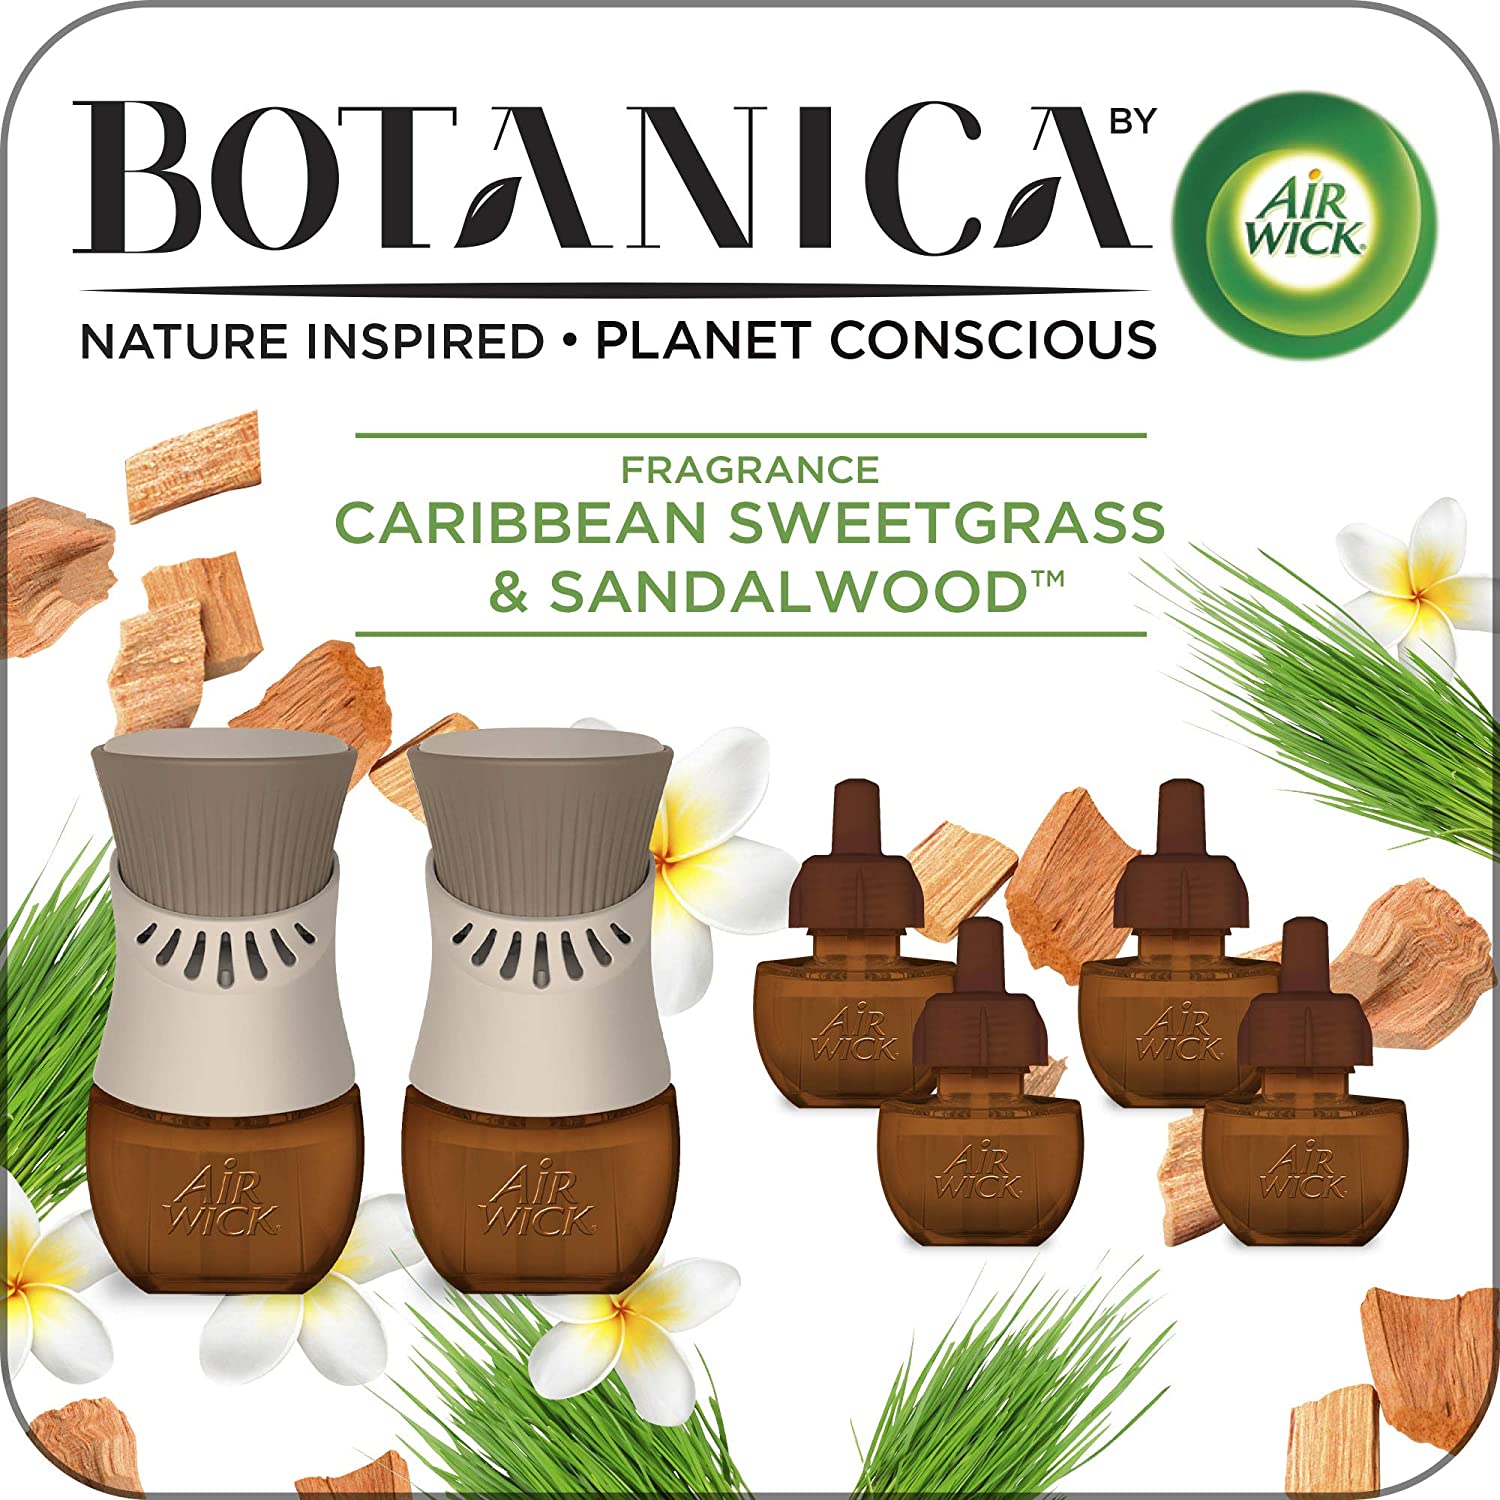 AIR WICK® Botanica Scented Oil - Caribbean Sweetgrass & Sandalwood - Kit (Discontinued)